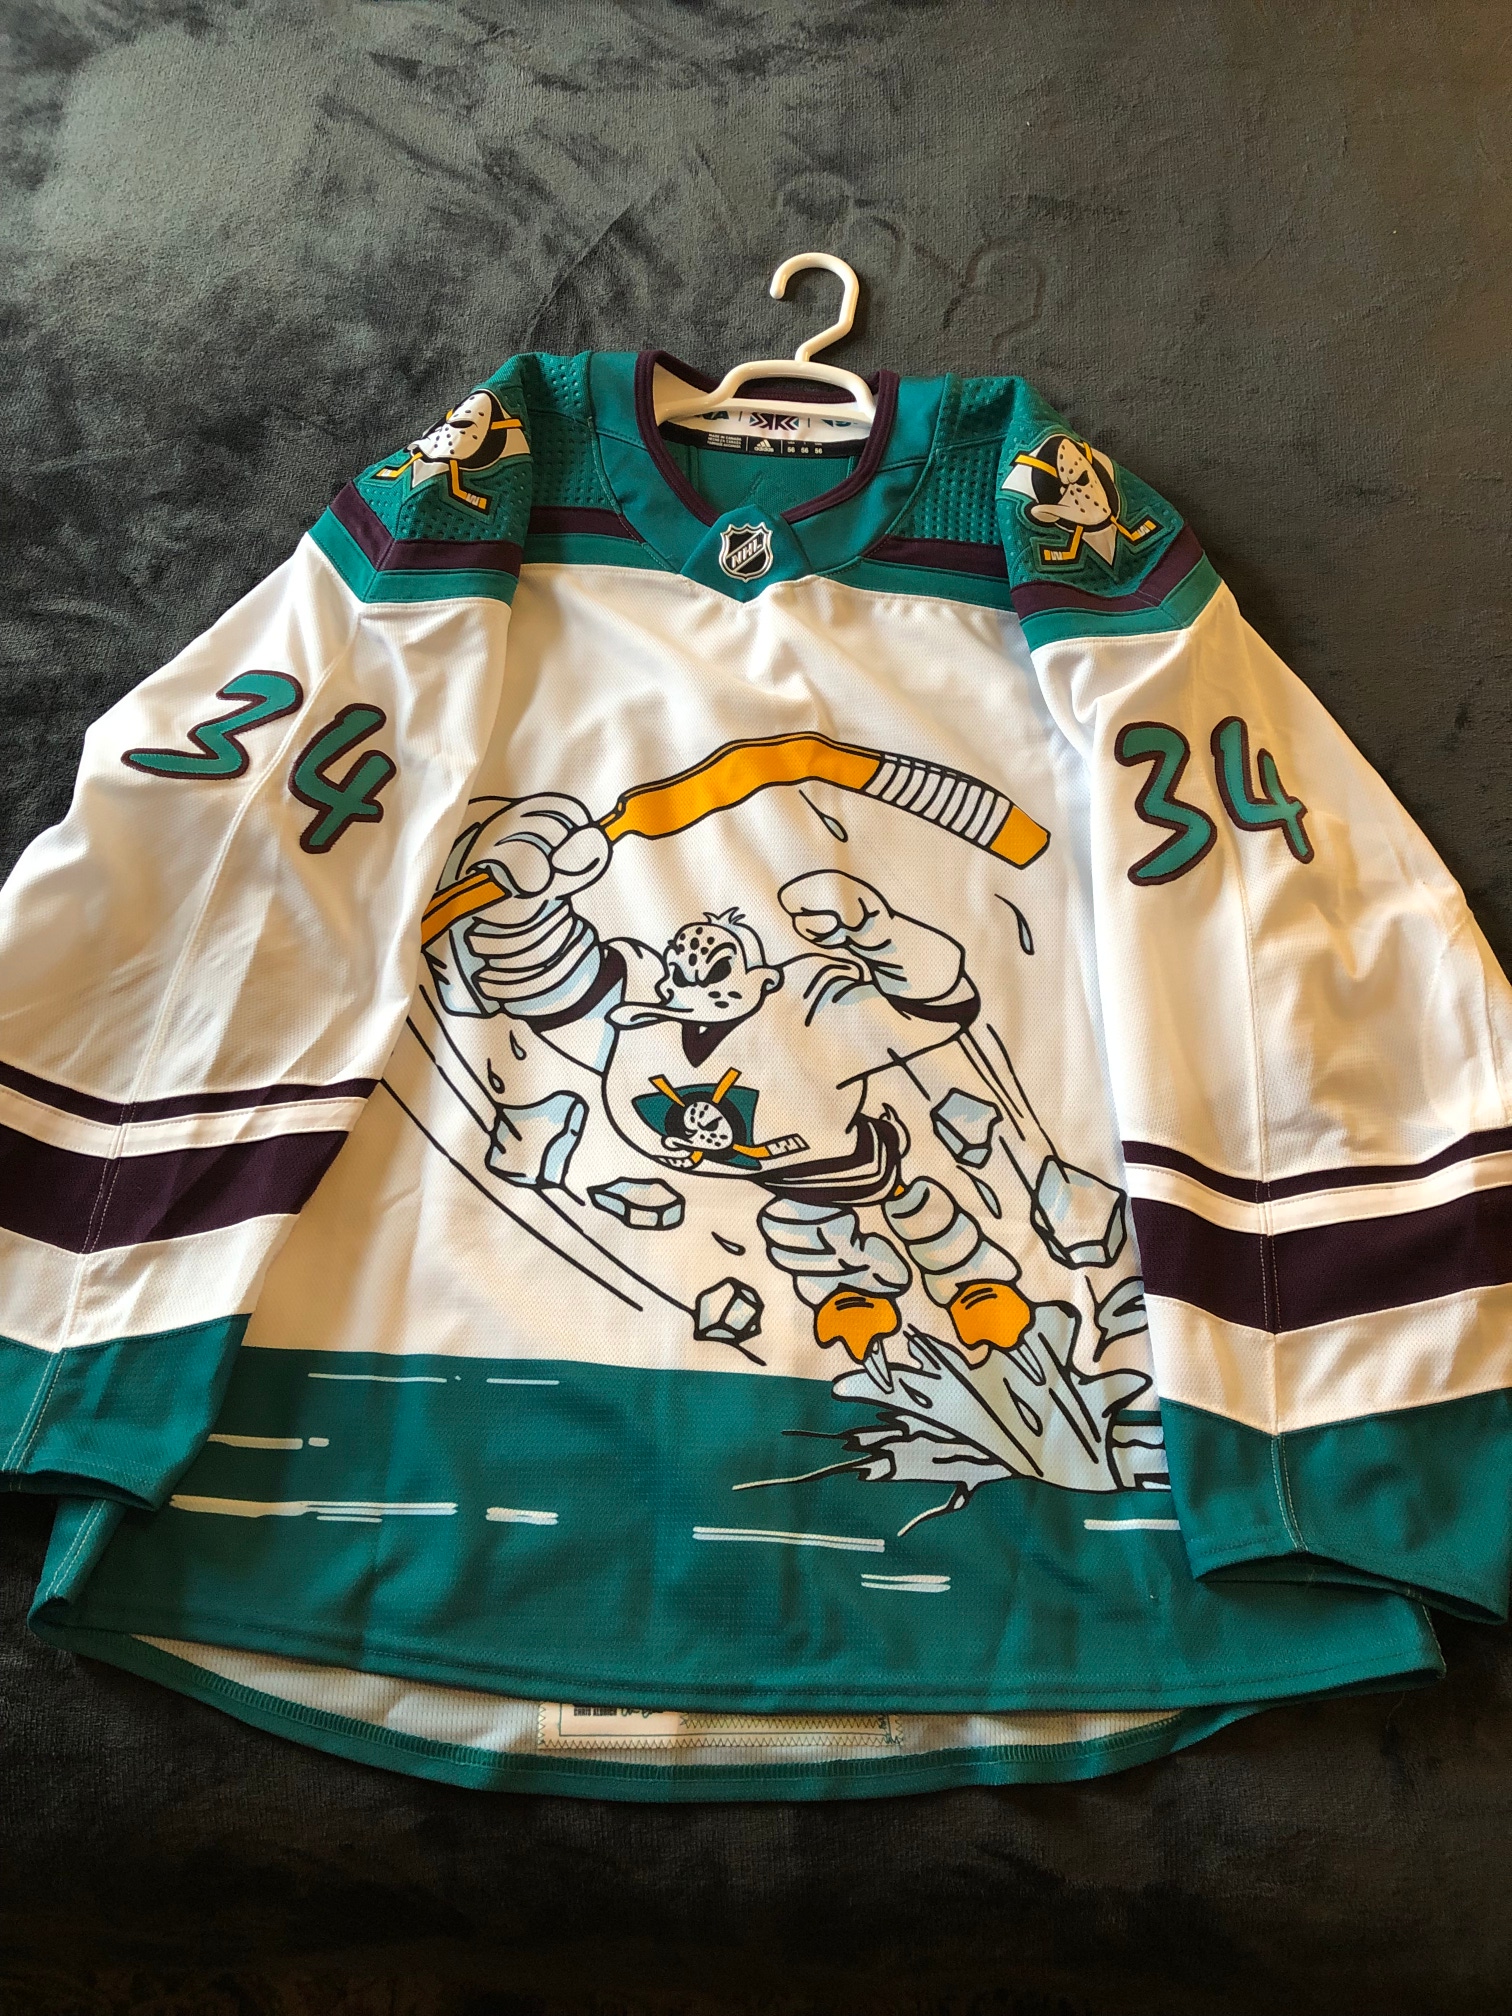 RARE Game Worn Autographed & Photomatched Drysdale "Wild Wing" Ducks Reverse Retro 1.0 Jersey w/ LOA